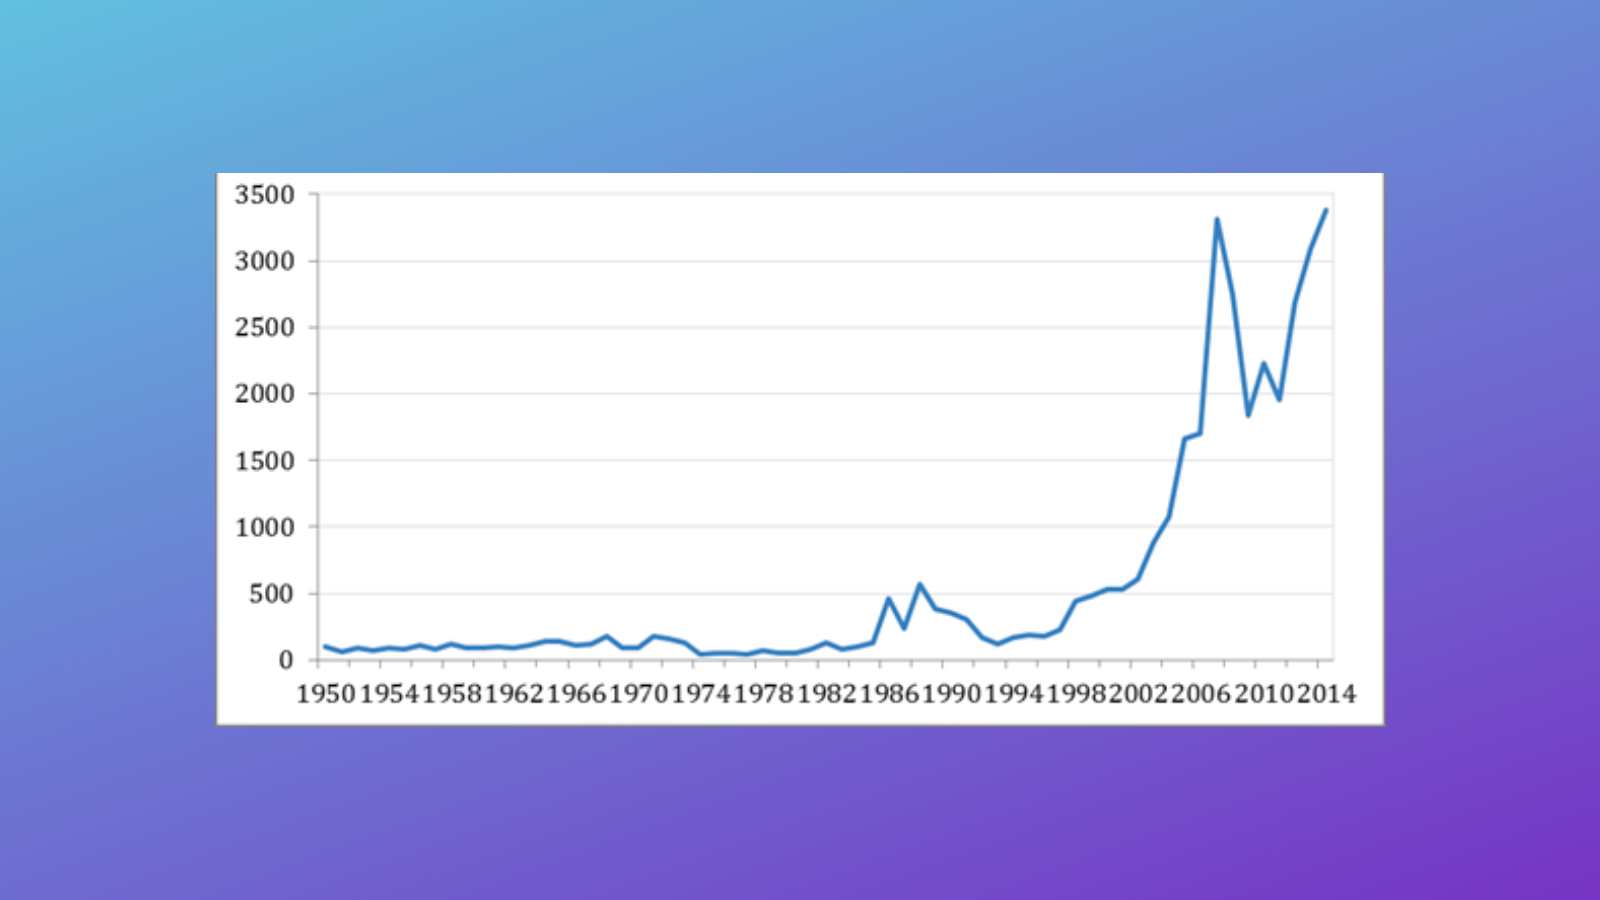 line chart of manhattan land prices rising from 0 to 3500